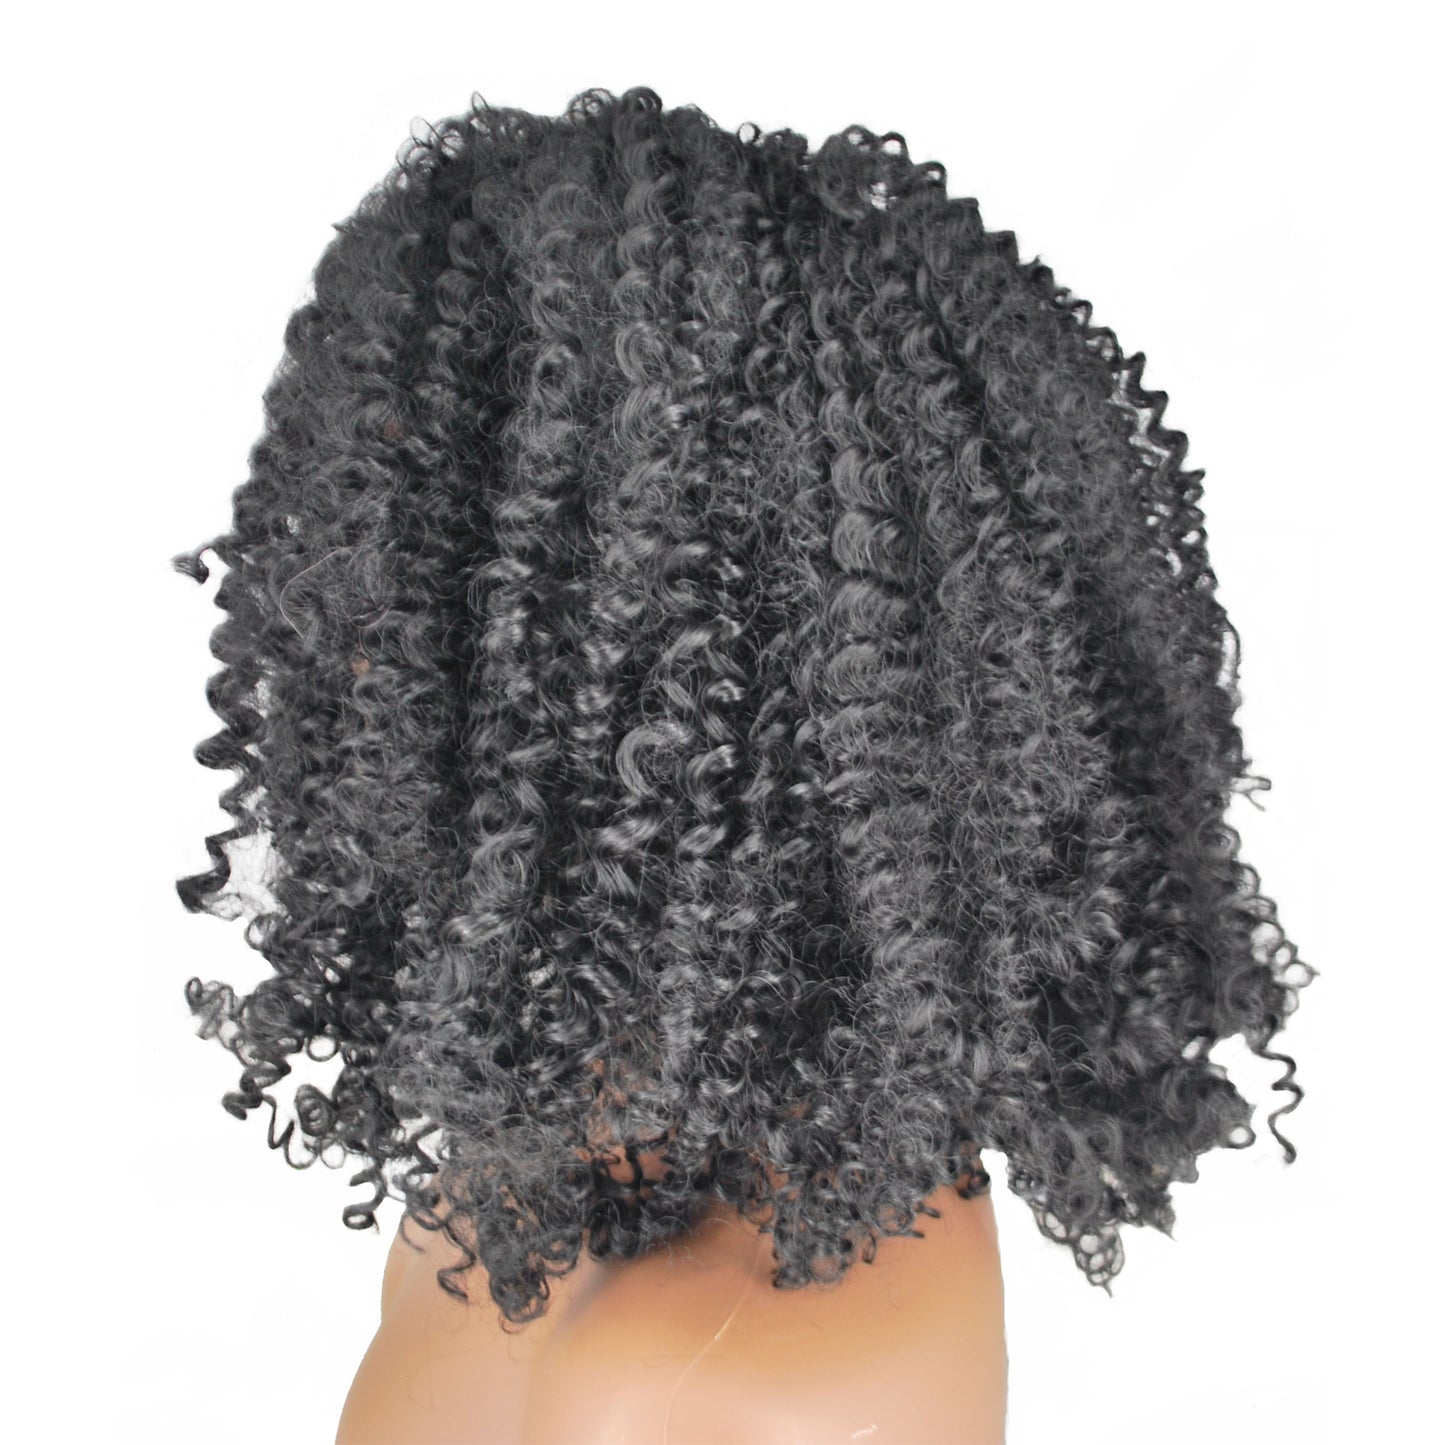 Black Afro Kinky Curly Headband Wig for Black Women Non lace Wig Easy to Install Daily Use